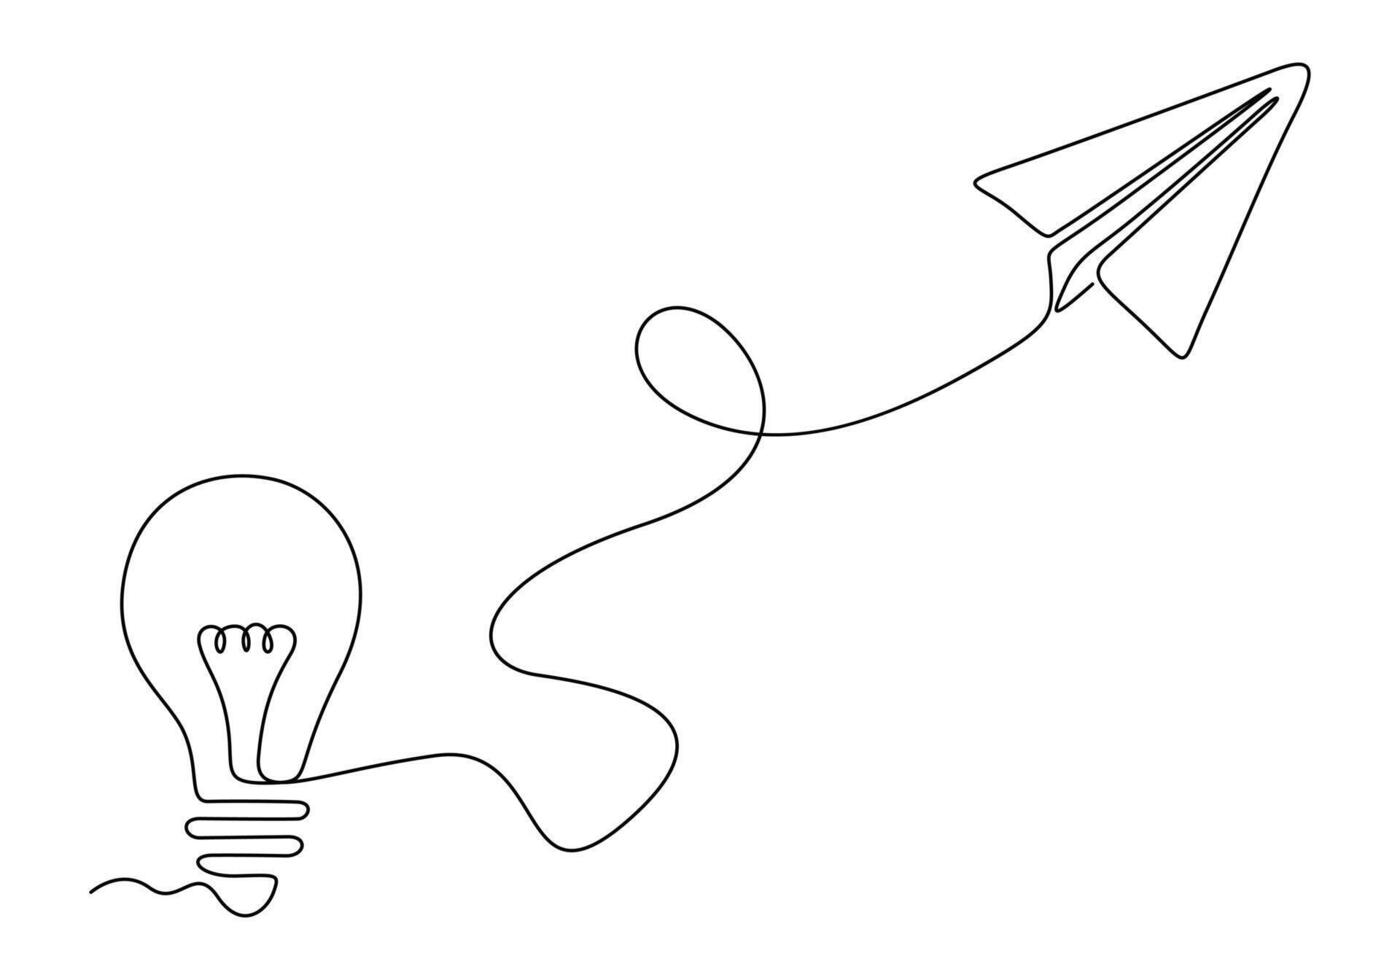 Simple light bulb and airplane continuous one line drawing vector illustration